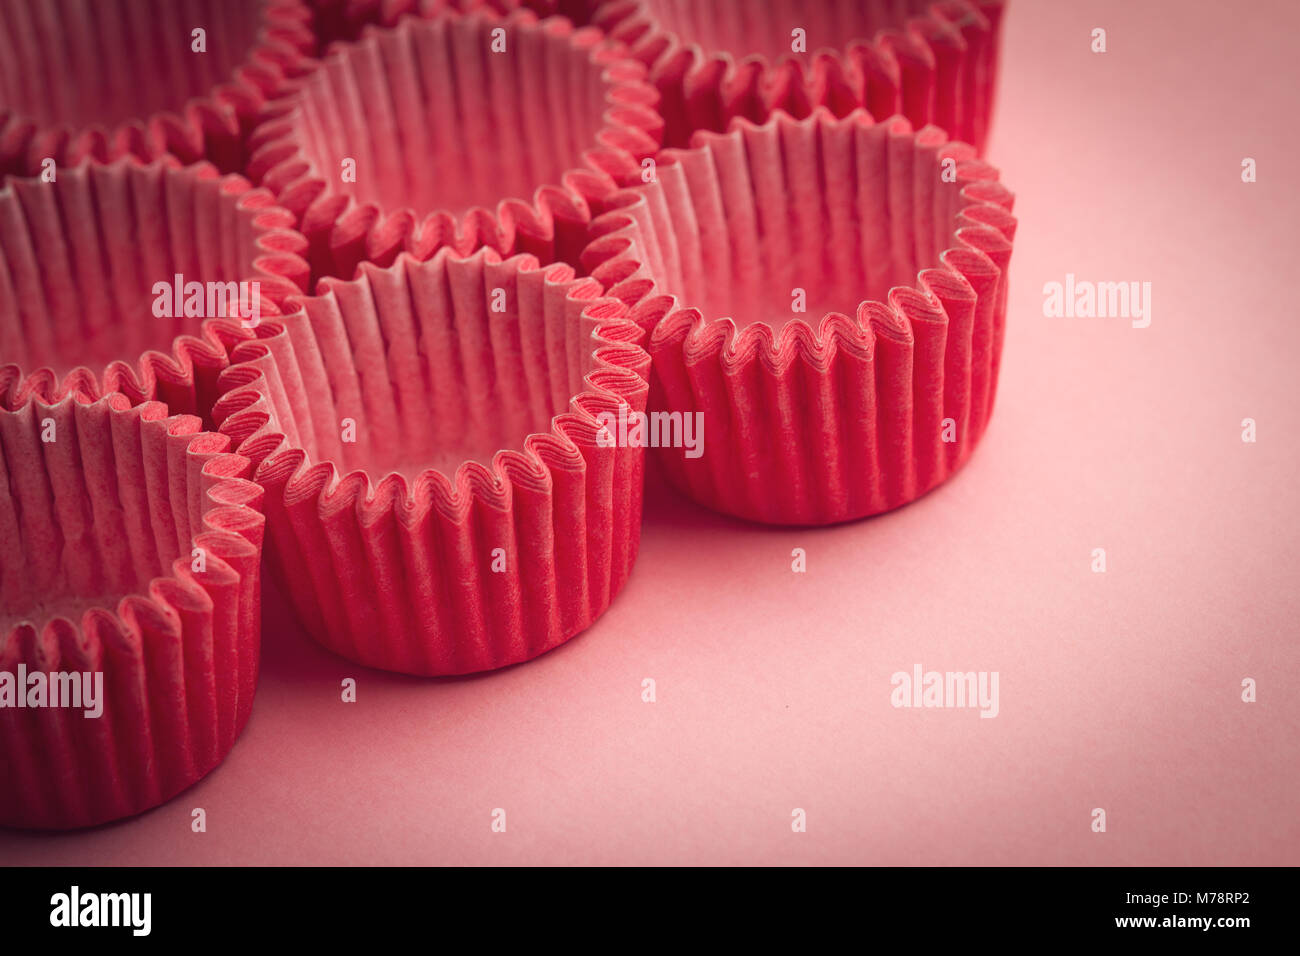 horizontal closeup top view of small paper baking tray holders for cupcakes and muffin on pink background Stock Photo